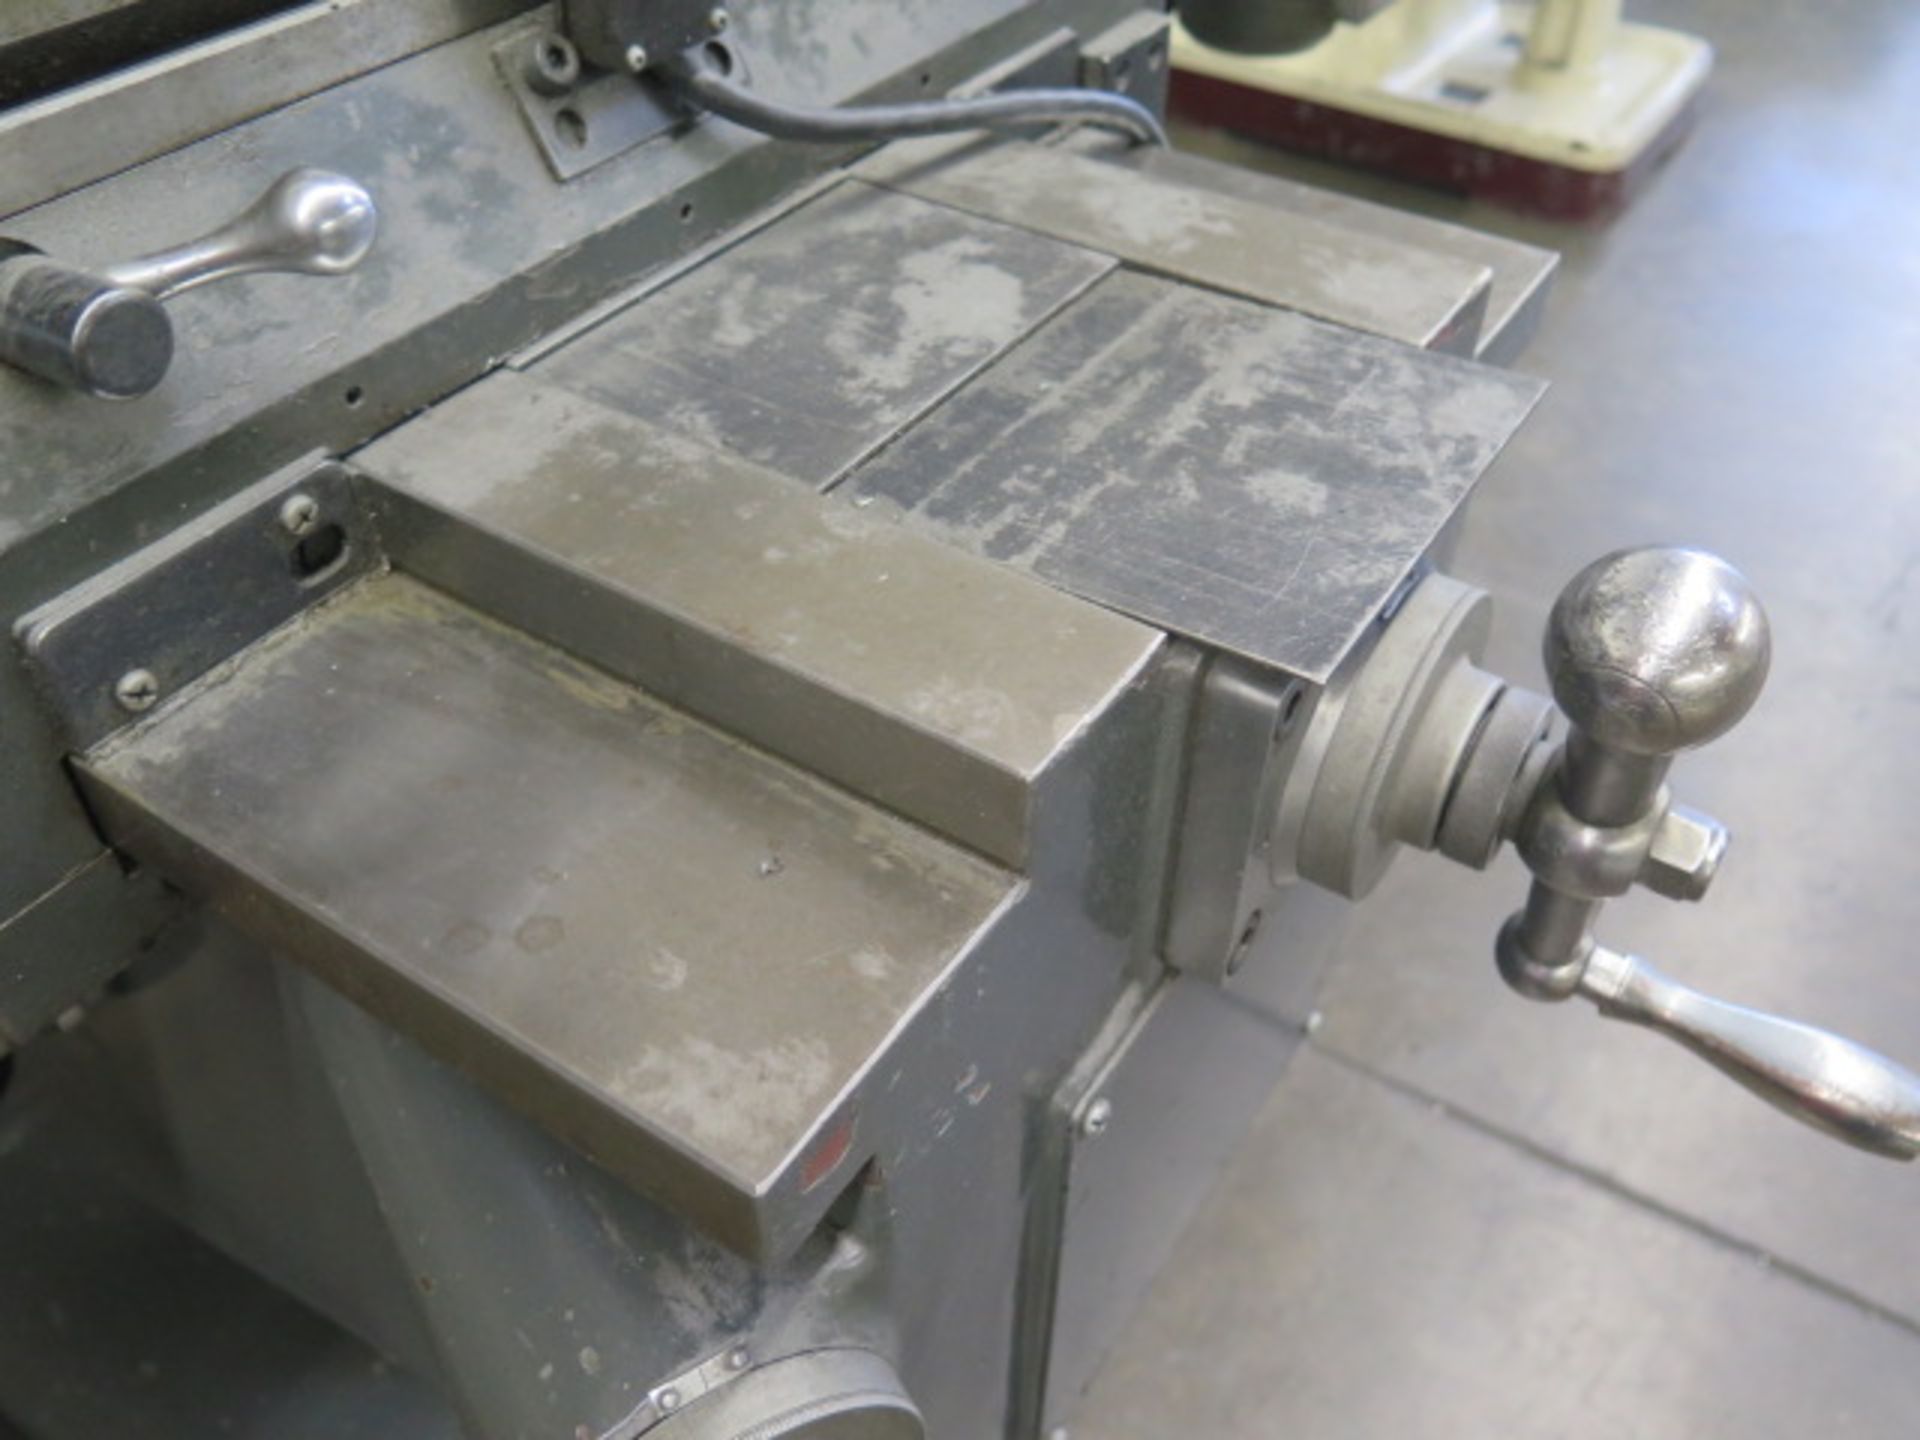 Acra WS-18VH Vertical Mill s/n 802062 w/ Sargon DRO, 3Hp Motor, 70-4200 Dial Change RPM, R8 Spindle, - Image 4 of 6